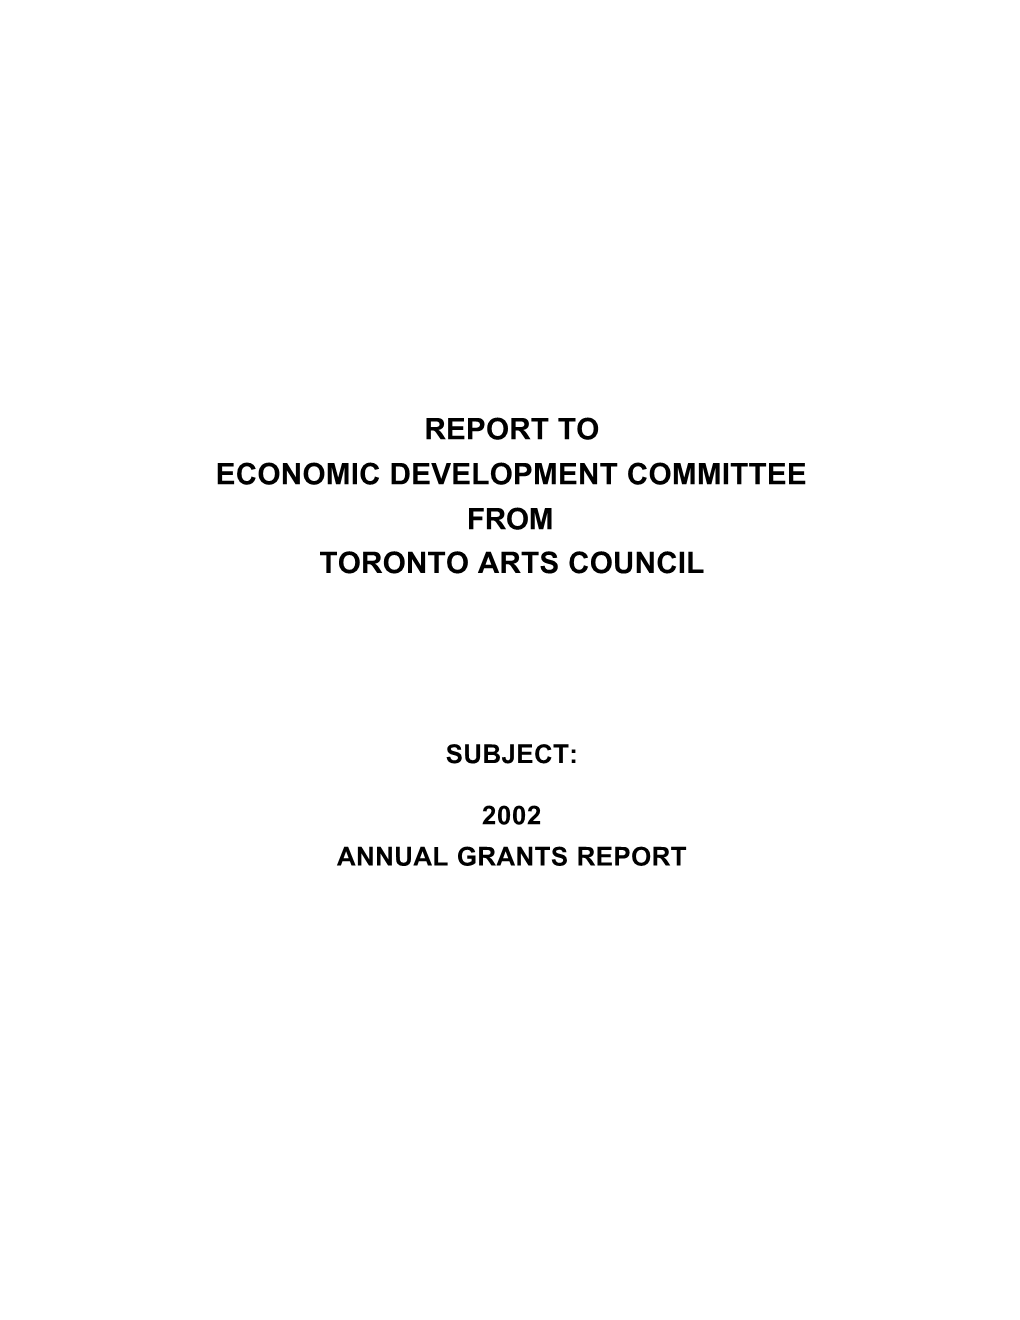 Report to Economic Development Committee from Toronto Arts Council